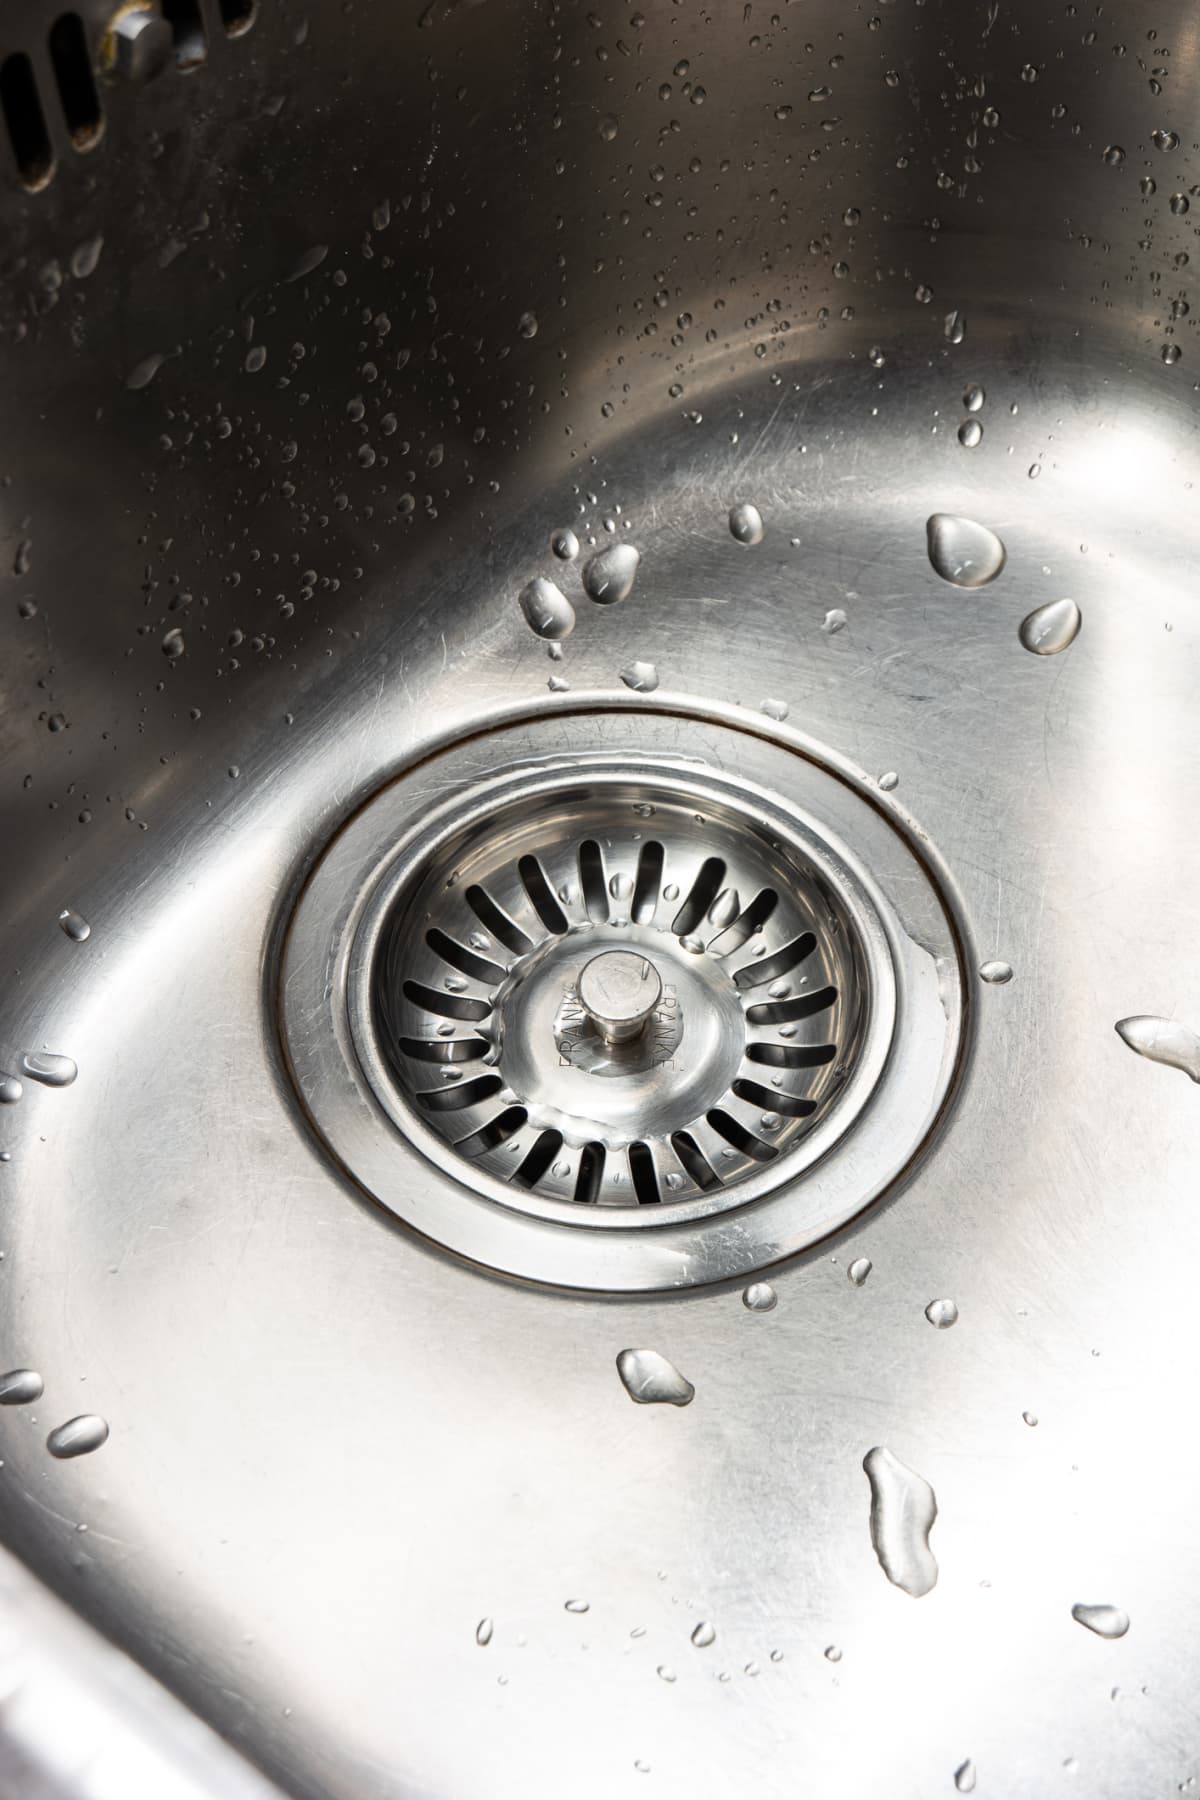 A clean stainless metal kitchen sink and drainage